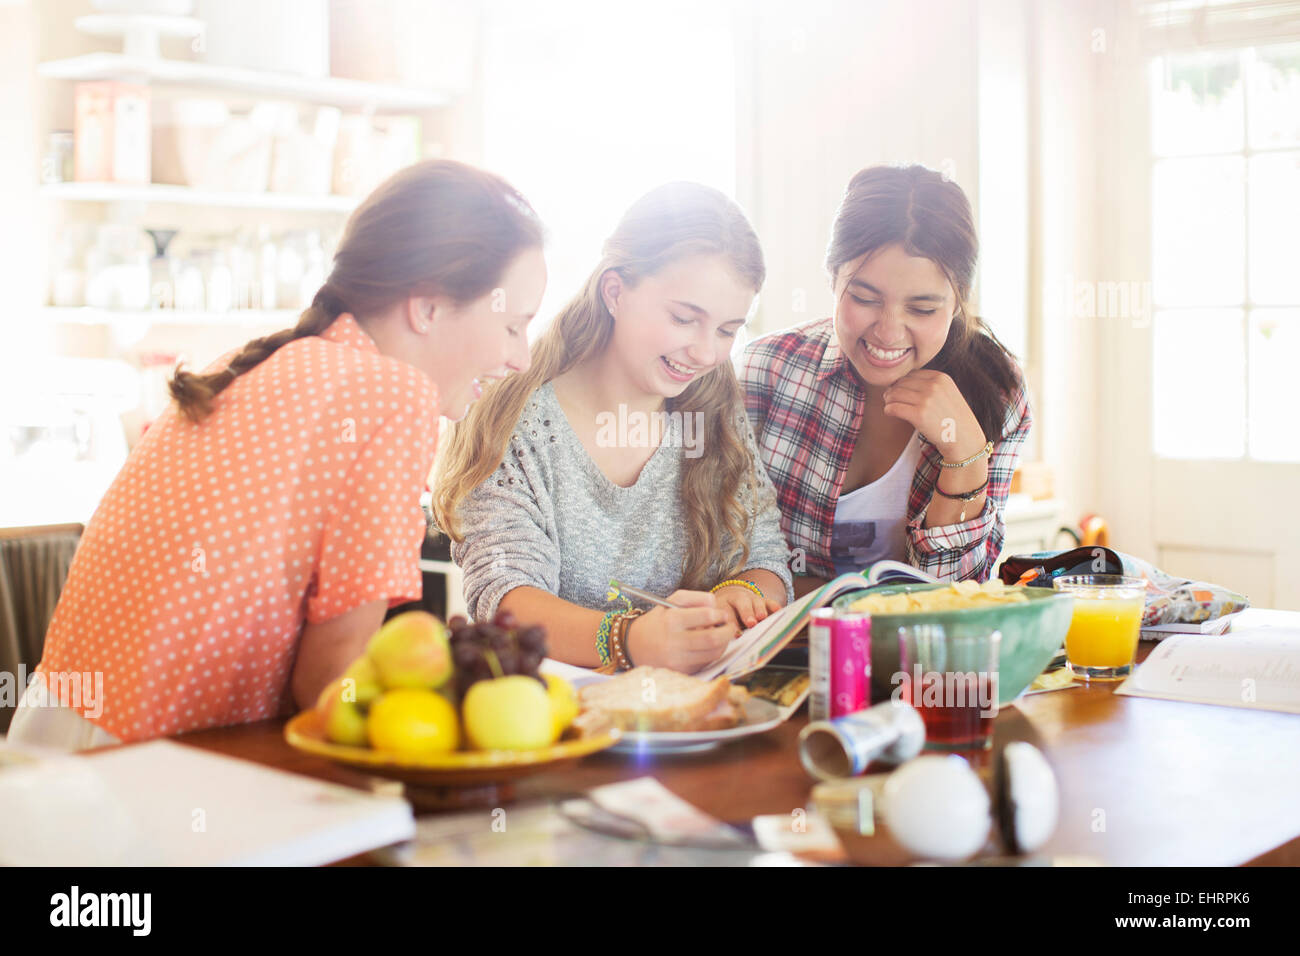 Three teenage girls learning at table in dining room Stock Photo